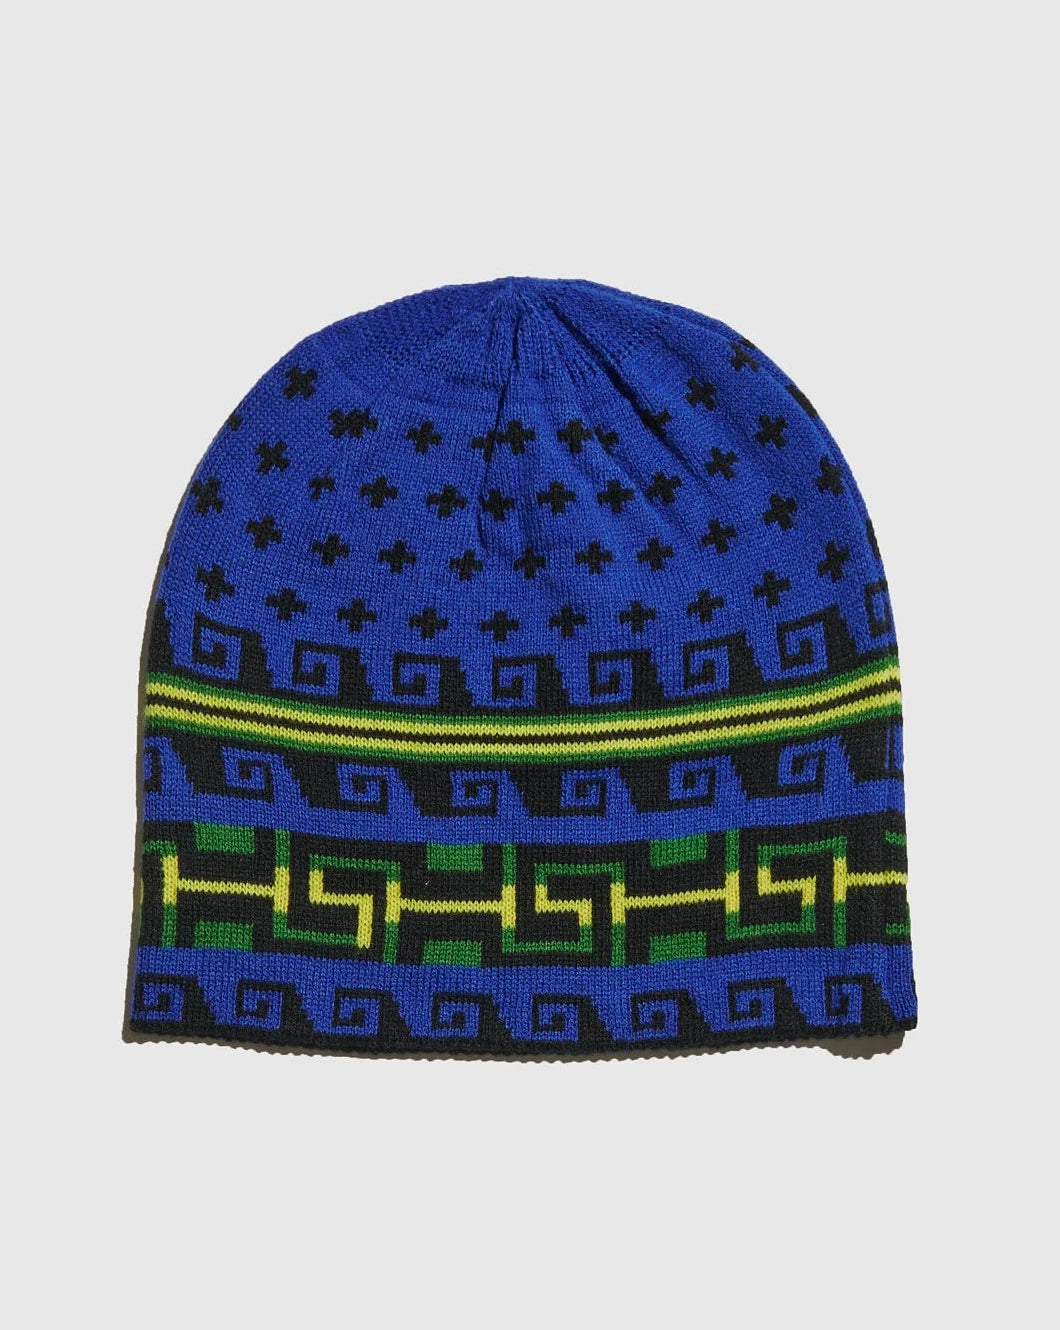 Spring Weight Beanie in Royal